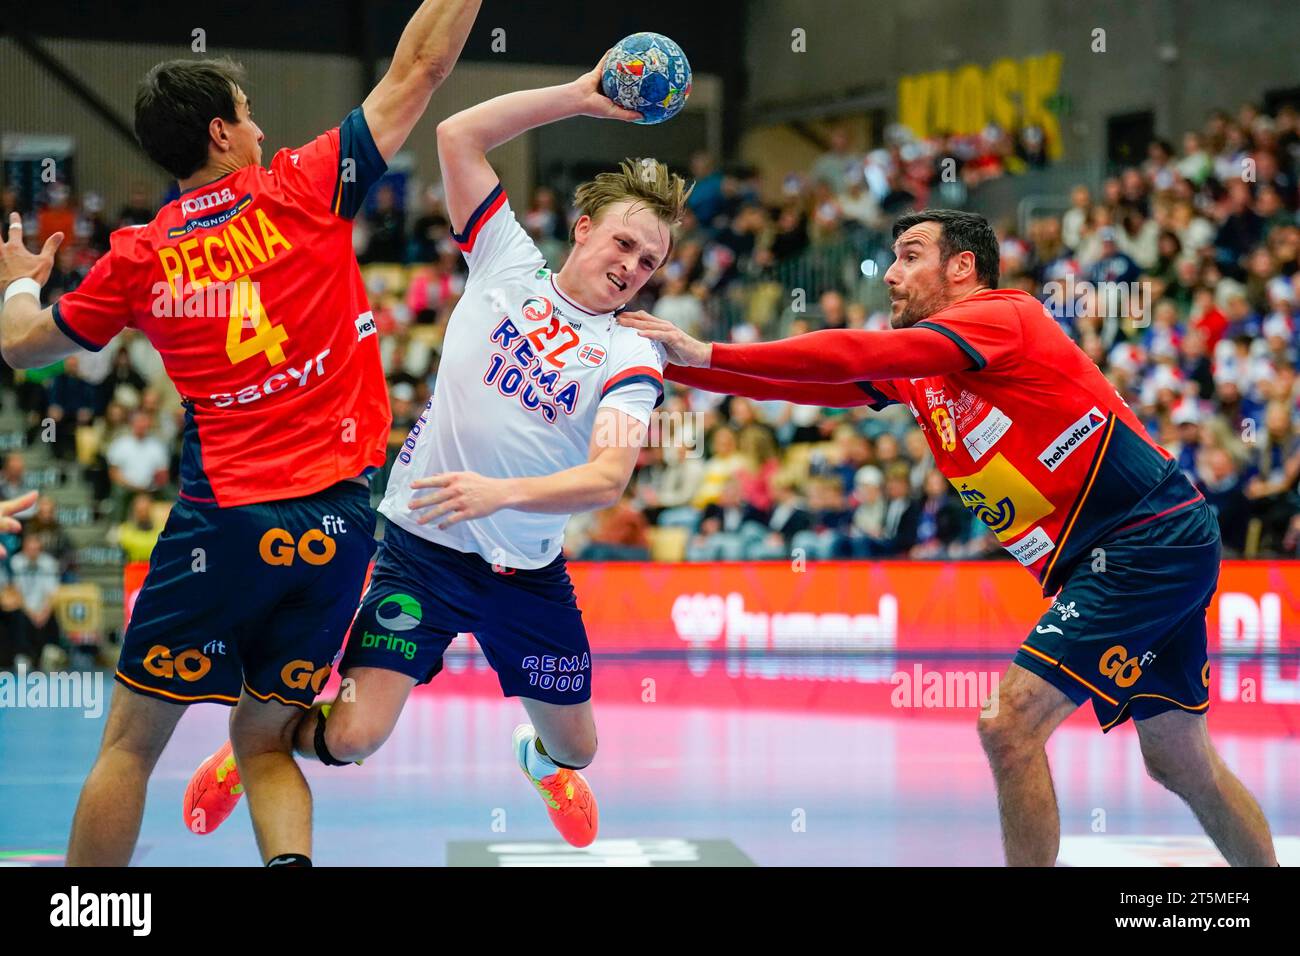 Sotra 20231105.Norway´s Tobias Schjoelberg Groendahl against Spain's Ignacio Peciña Tomé and Gedeón Guardiola Villaplana during the handball match in the Golden League Gjensidige Cup between Norway and Spain in the Sotra Arena. Photo: Stian Lysberg Solum / NTB Stock Photo